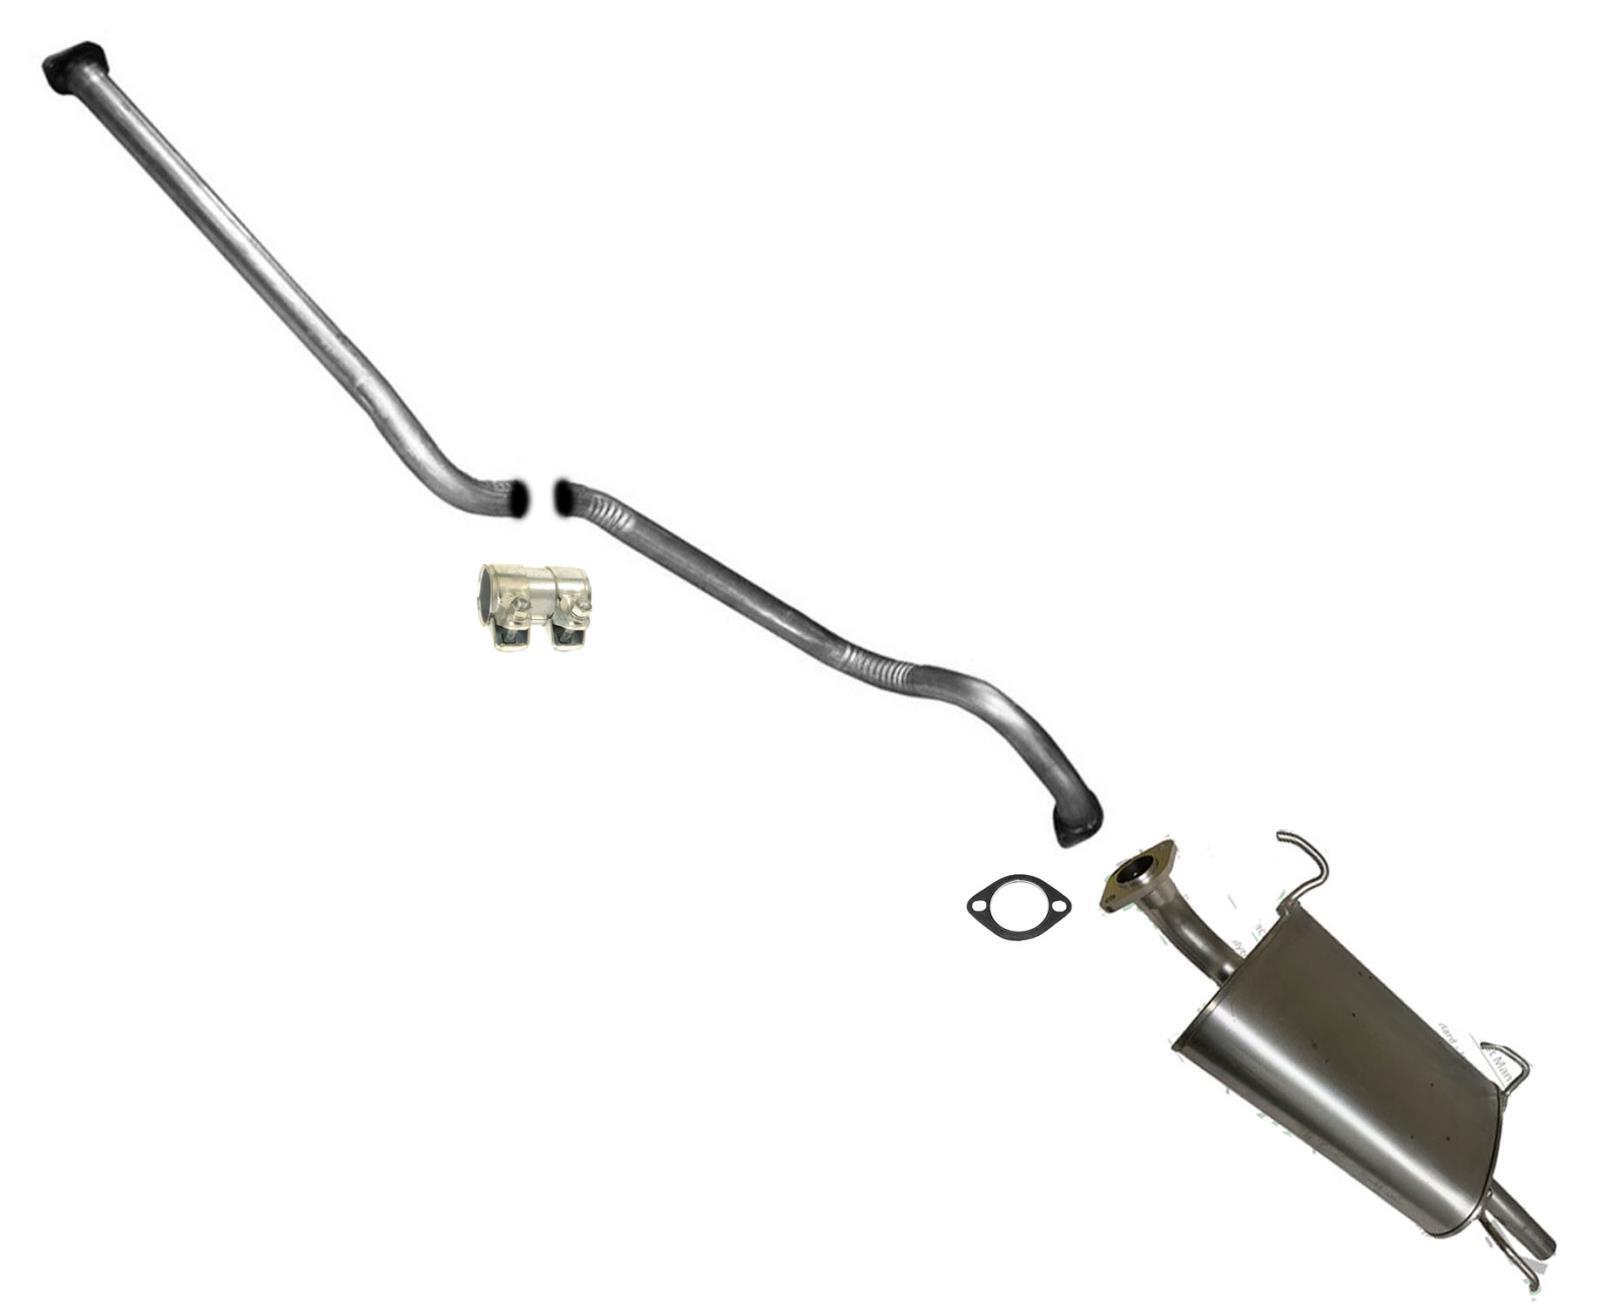 New Muffler Exhaust Pipe System for Nissan Sentra 1.8L 2002-2006 Made In USA